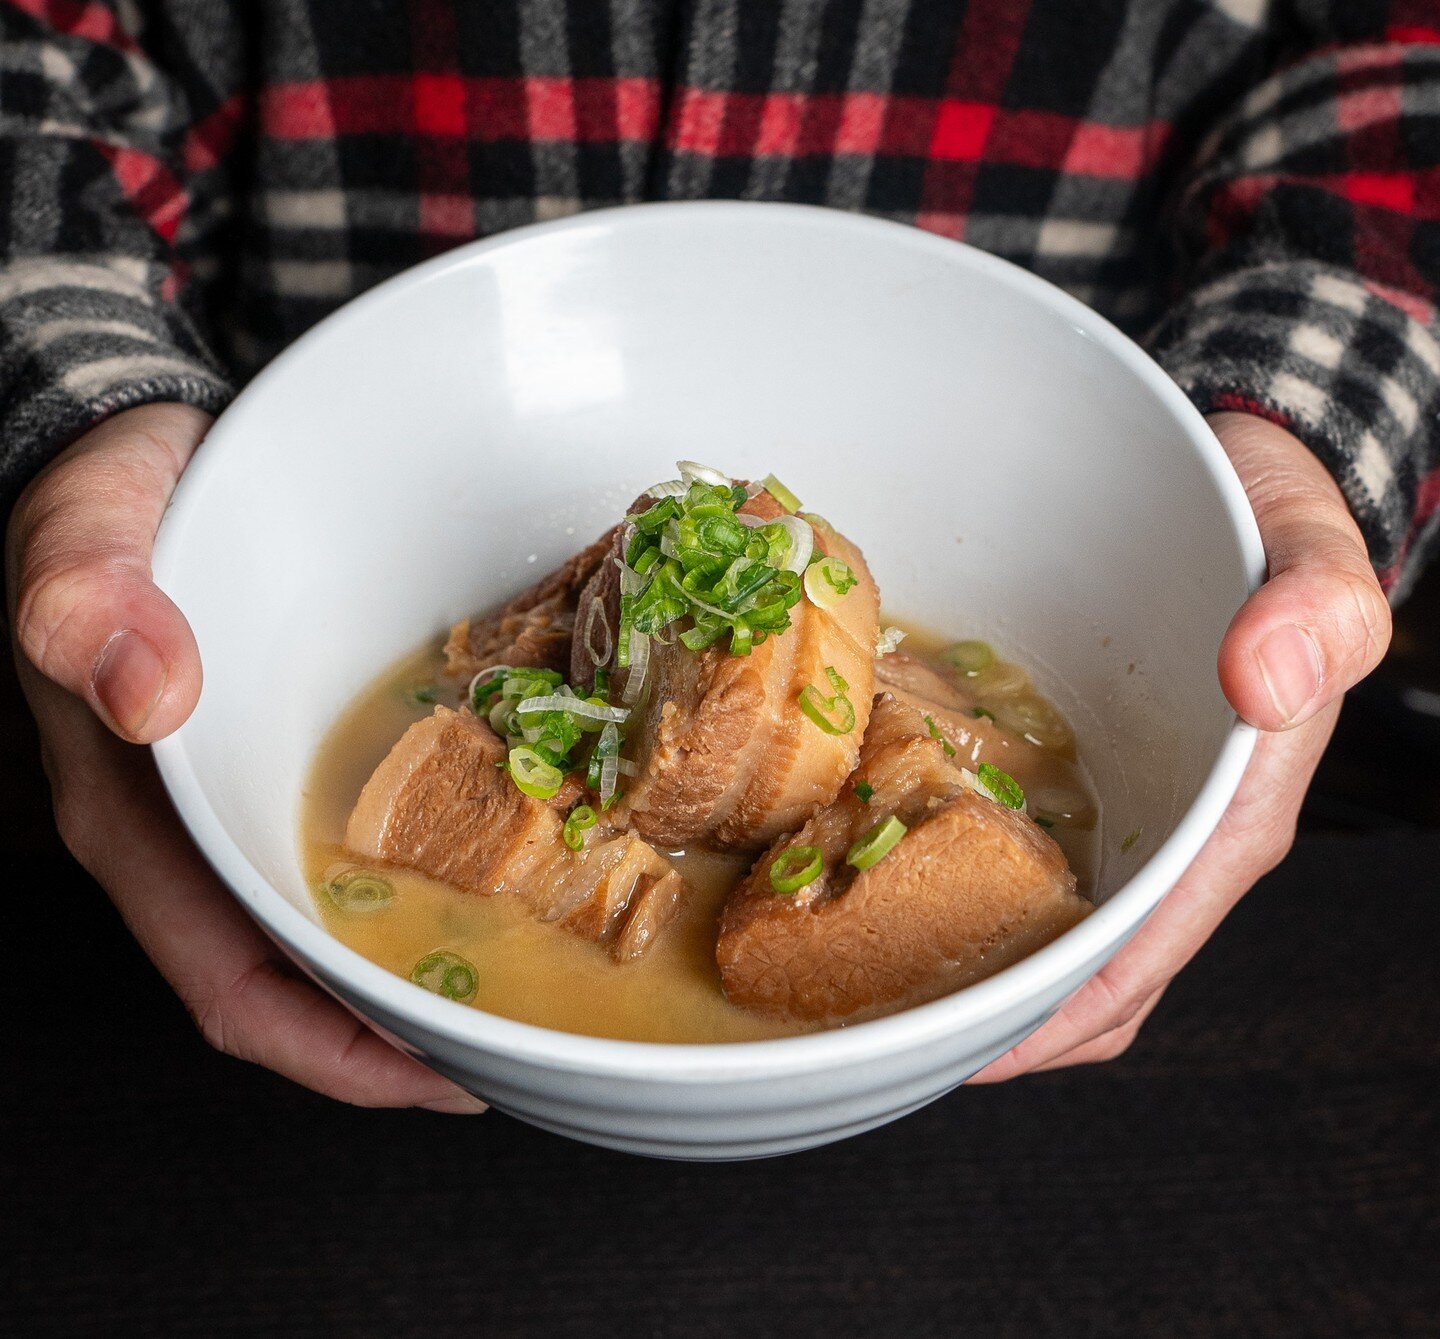 Begin your culinary adventure with a delicious Kakuni appetizer. Tender braised pork belly infused with rich flavors, promising a delightful prelude to your meal! ITADAKIMASU! #FoodieFindsLA 🍖✨ 

👇 Freshly homemade noodles 
◾️◽️◾️◽️◾️◽️◾️◽️◾️◽️
🍜 